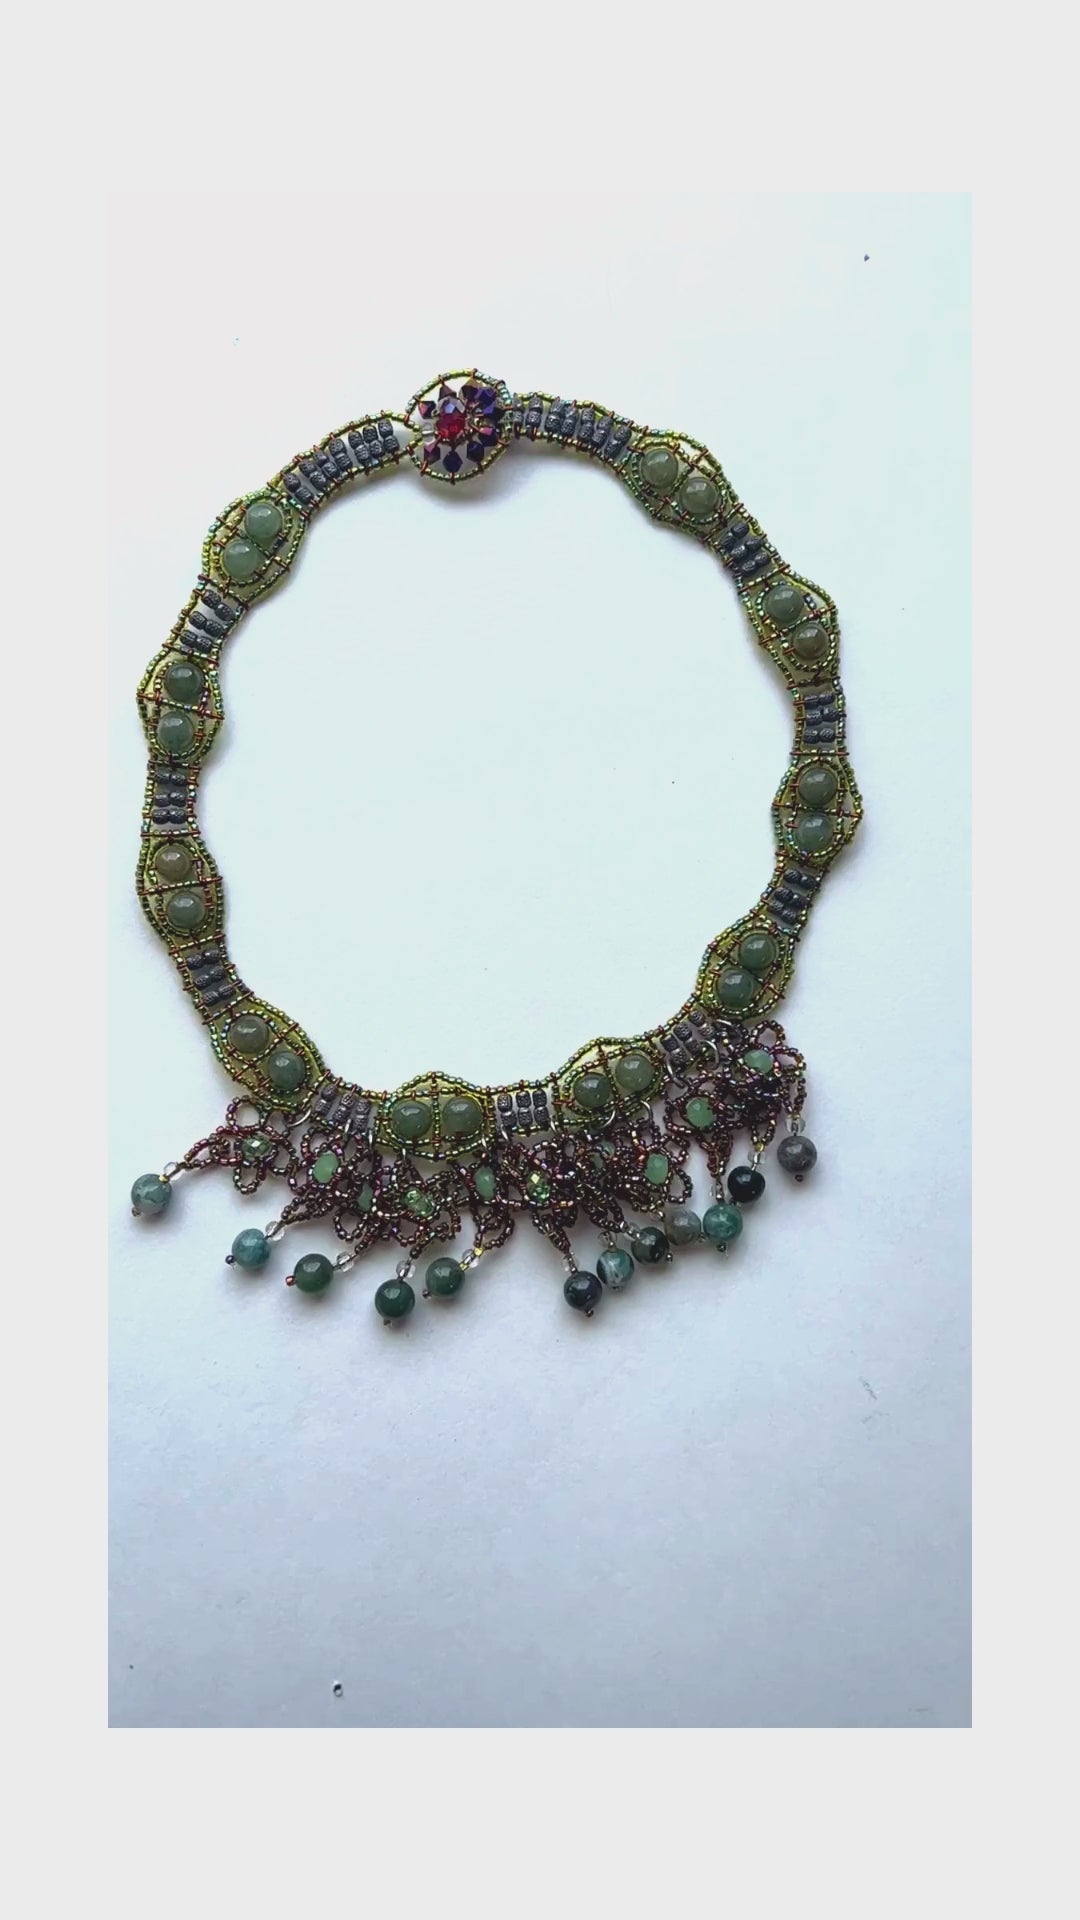 gemstone beaded choker necklace with lacy floral pattern - Sundara Joon